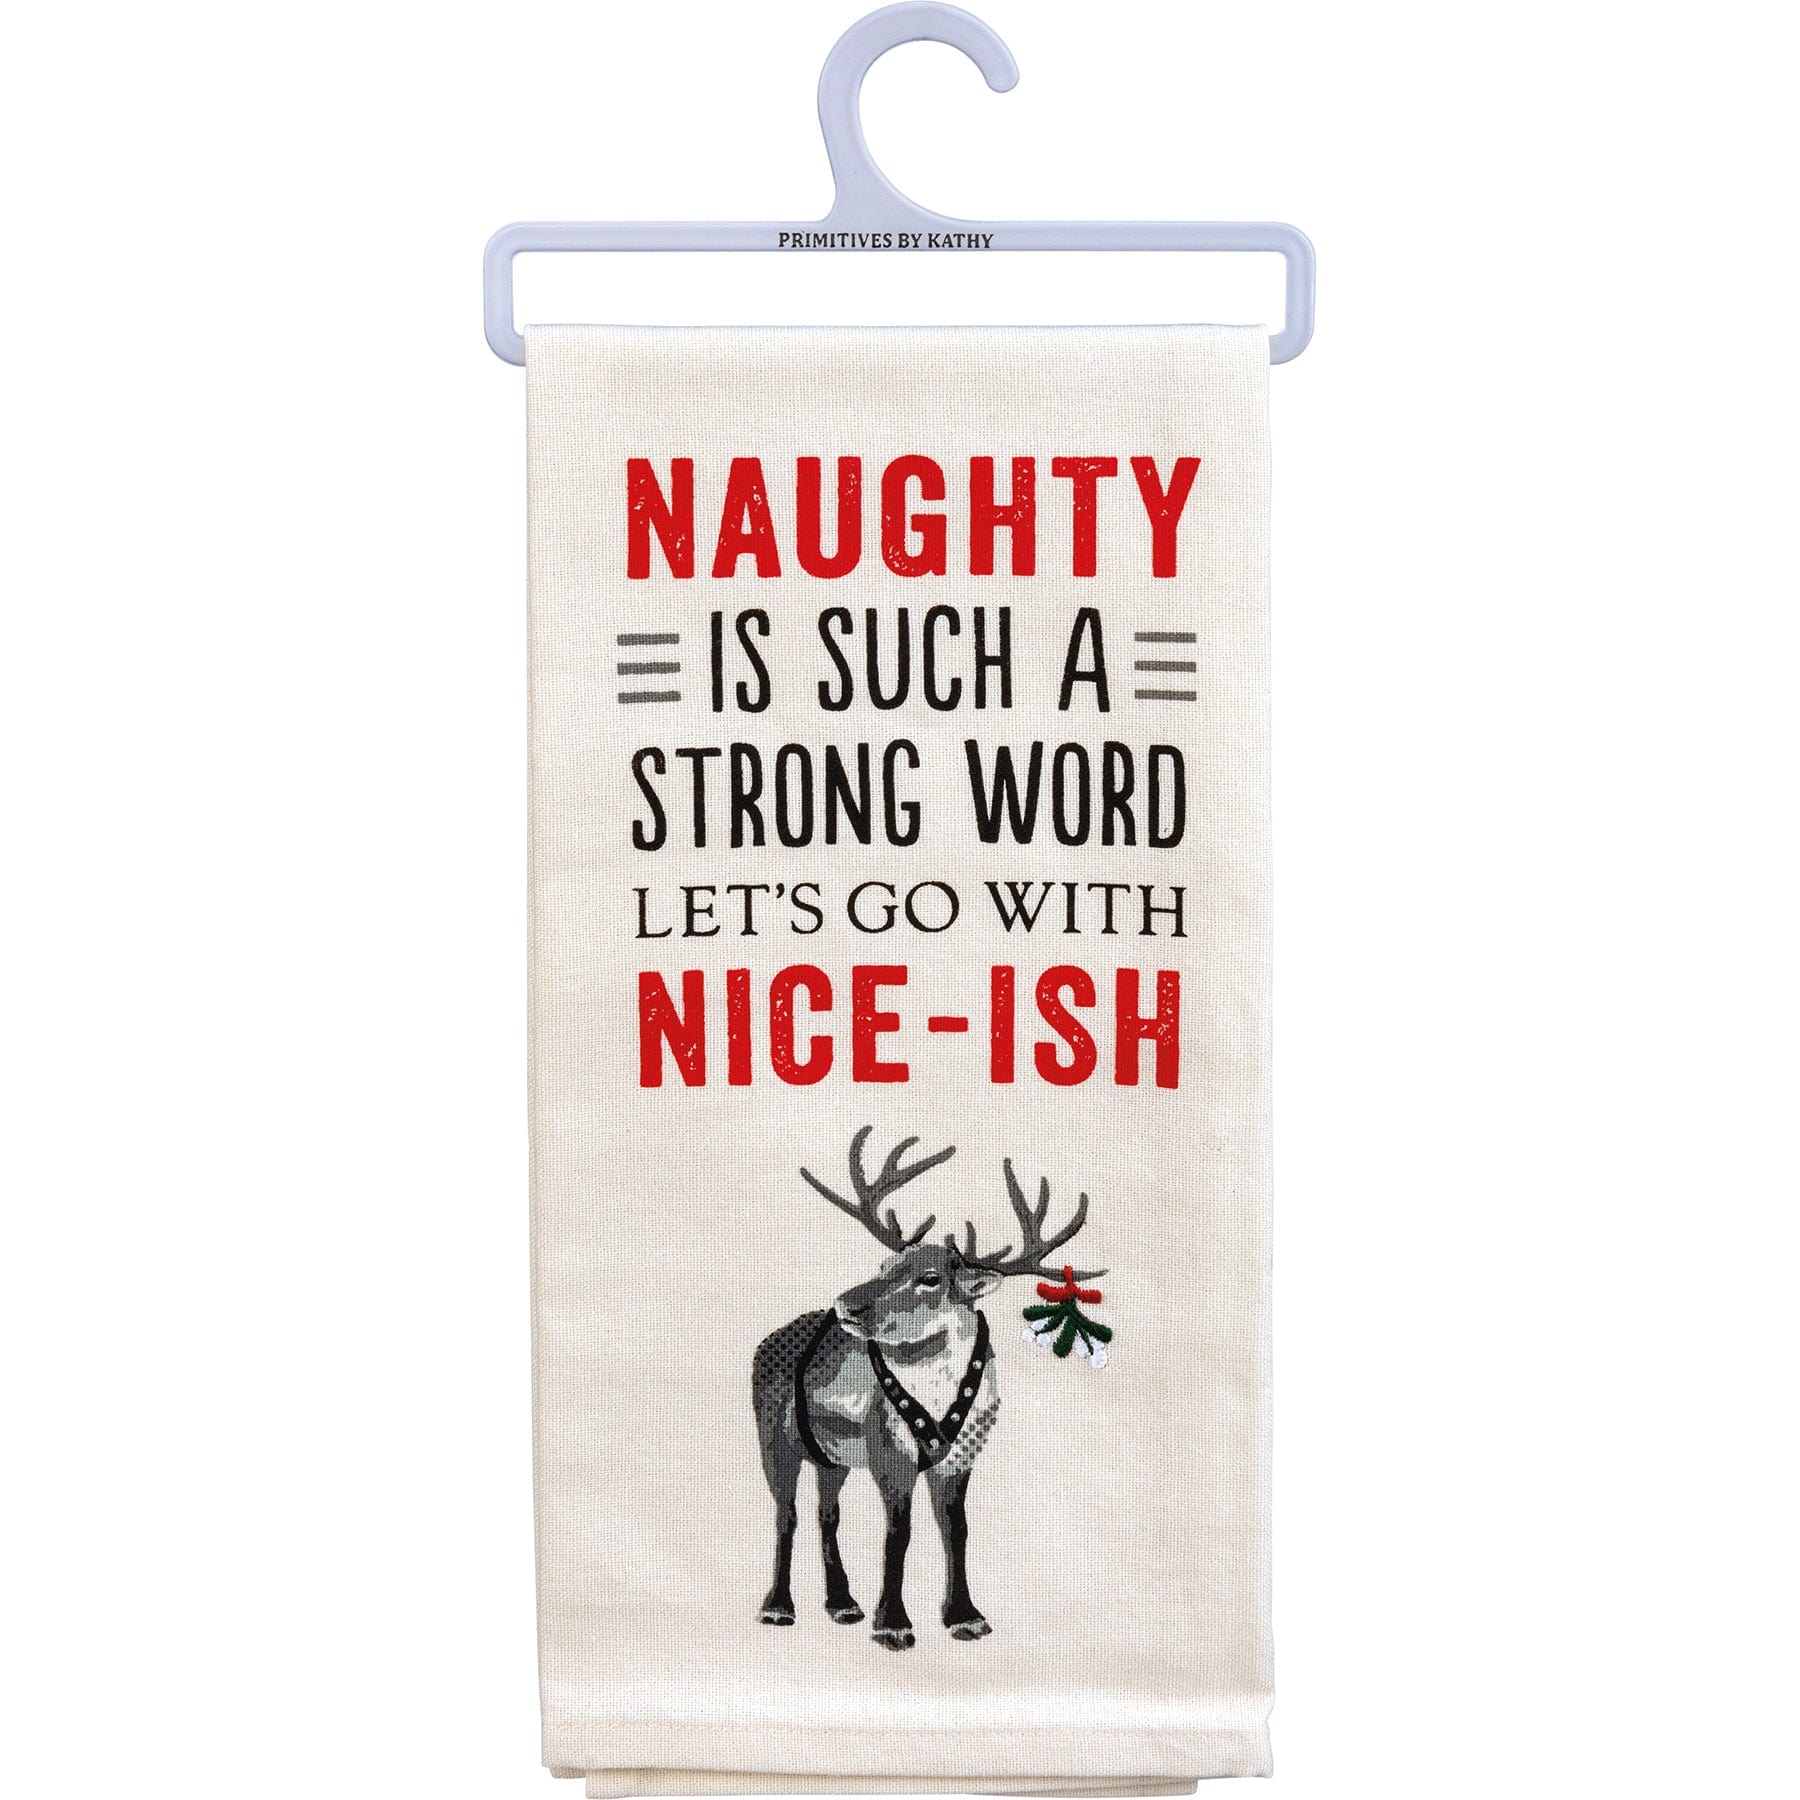 Kitchen Towels Kitchen Towel - Naughty Let's Go With Nice-ish PBK - 110131